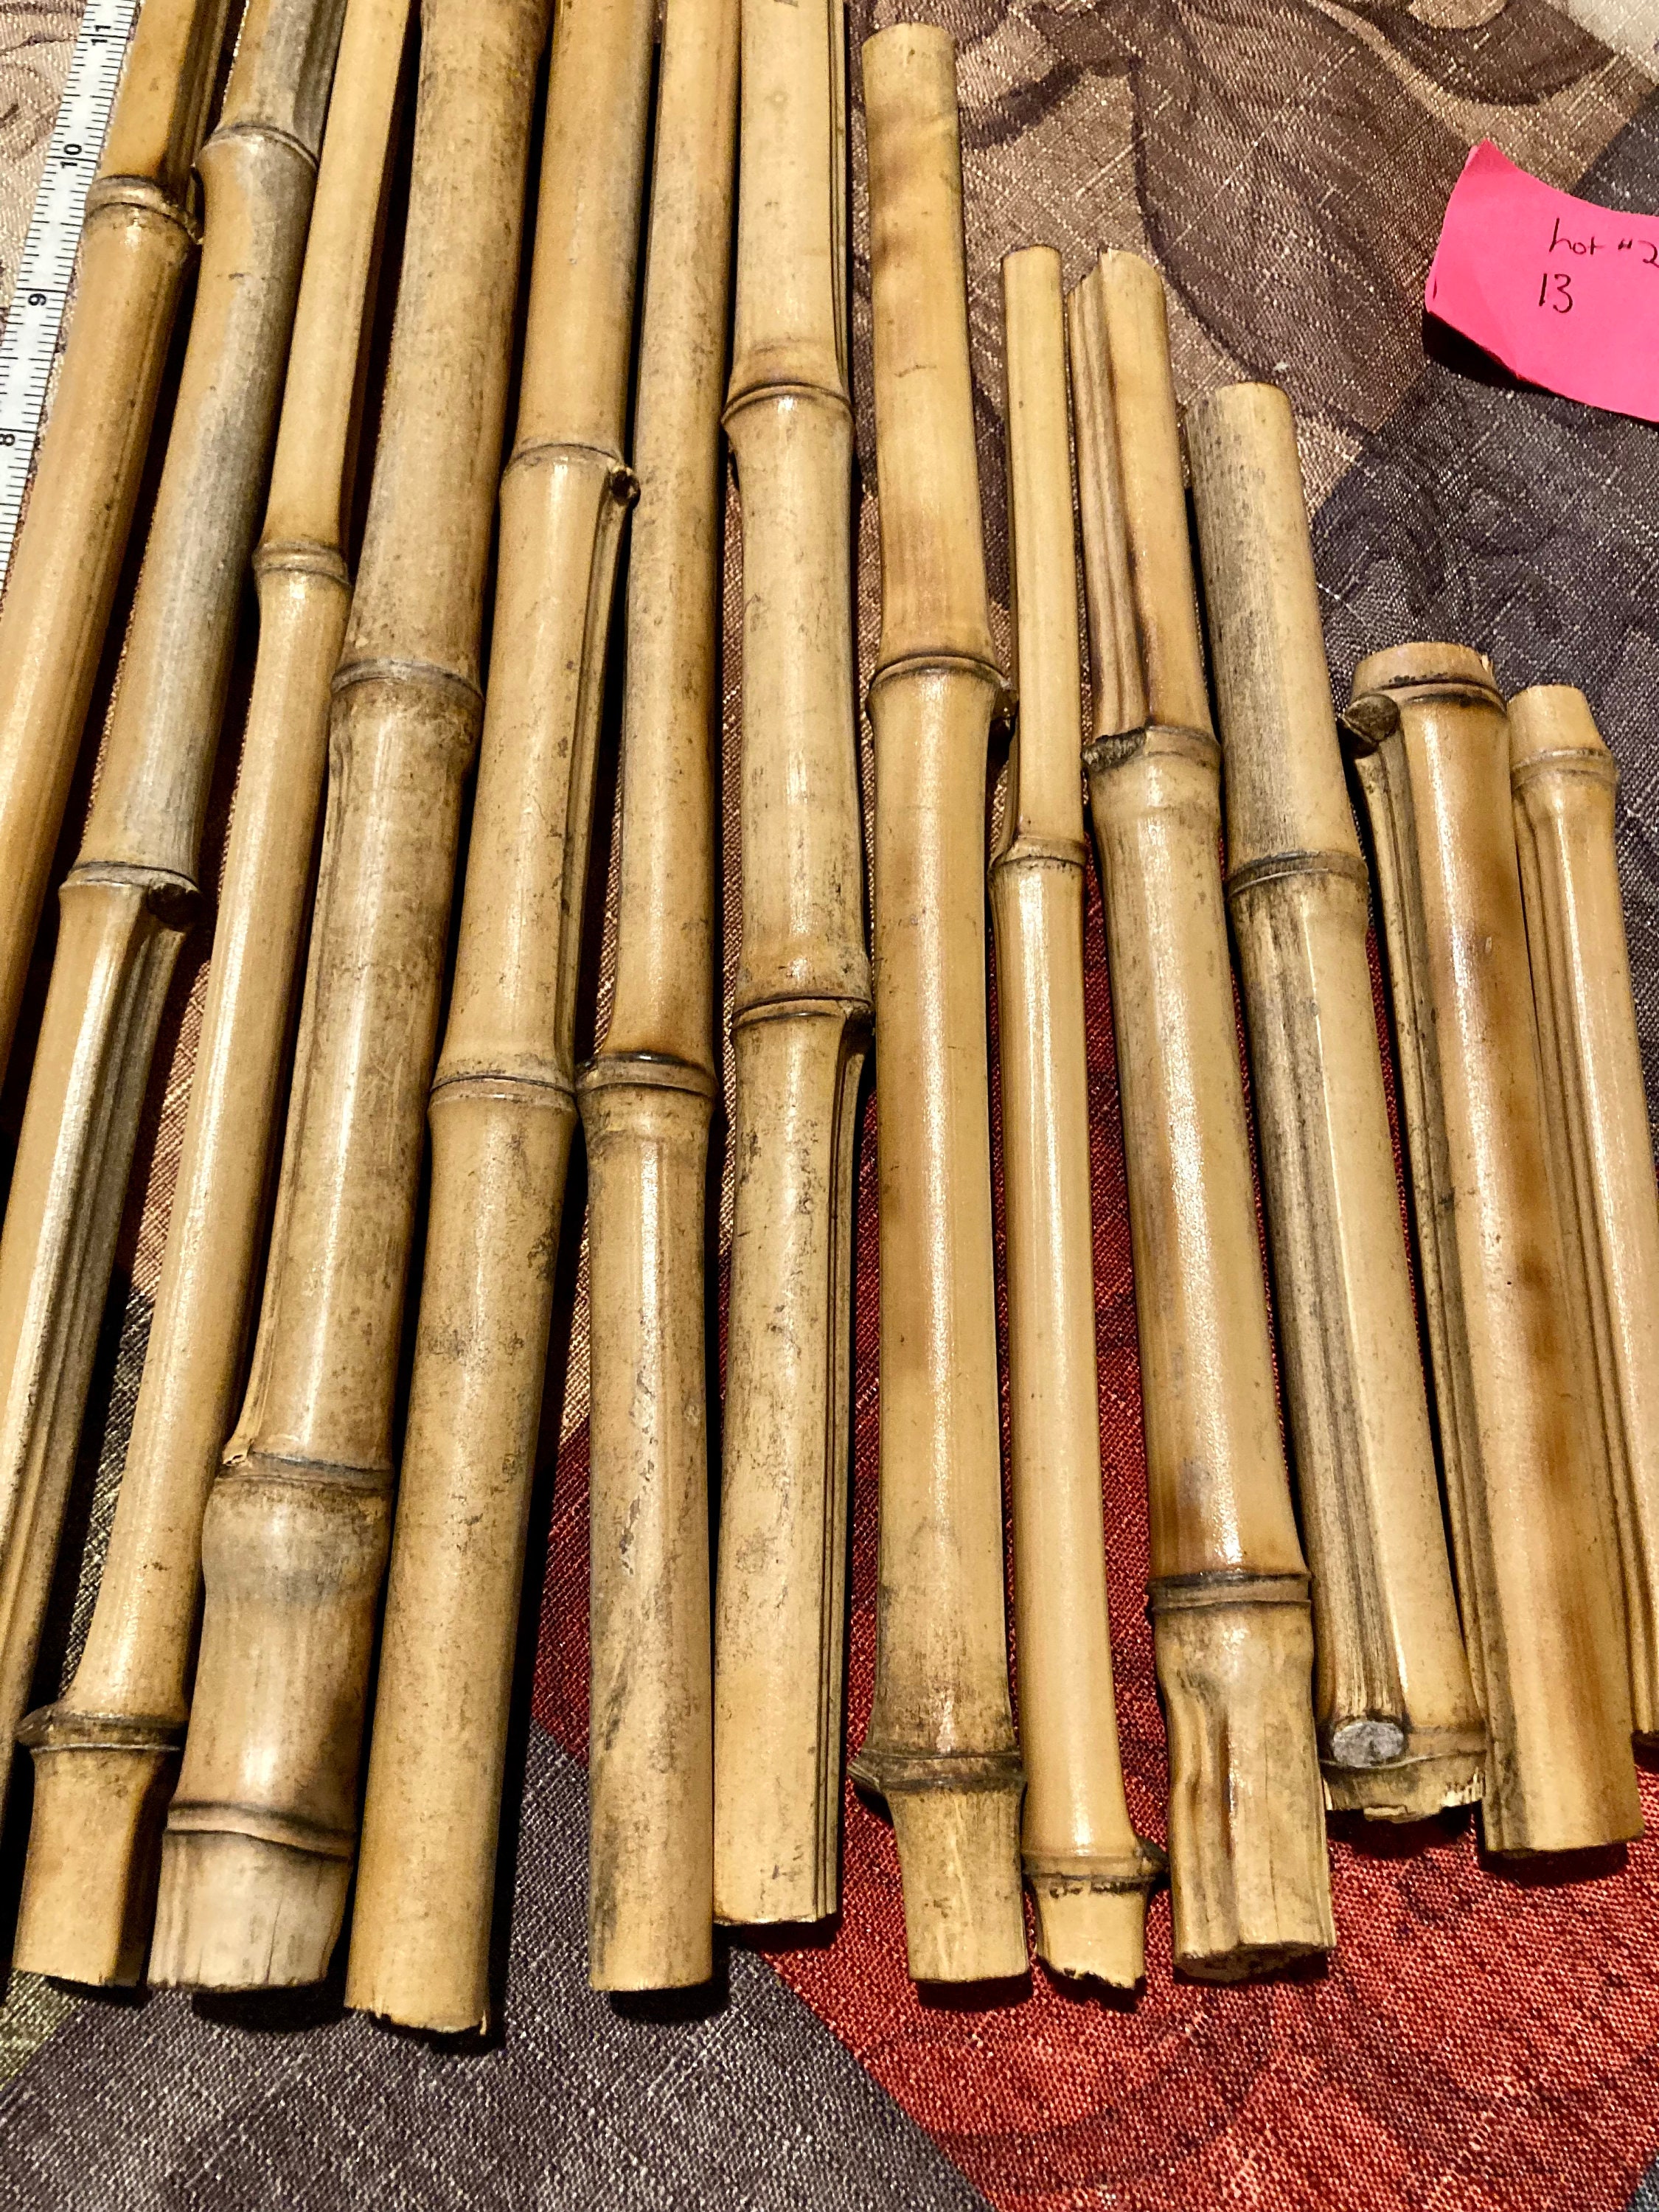 Bamboo Sticks , 12 Bamboo for Crafts,windchime Parts, Wind Chime Supplies,  Wooden Sticks, Reed Sticks, Green Bamboo 